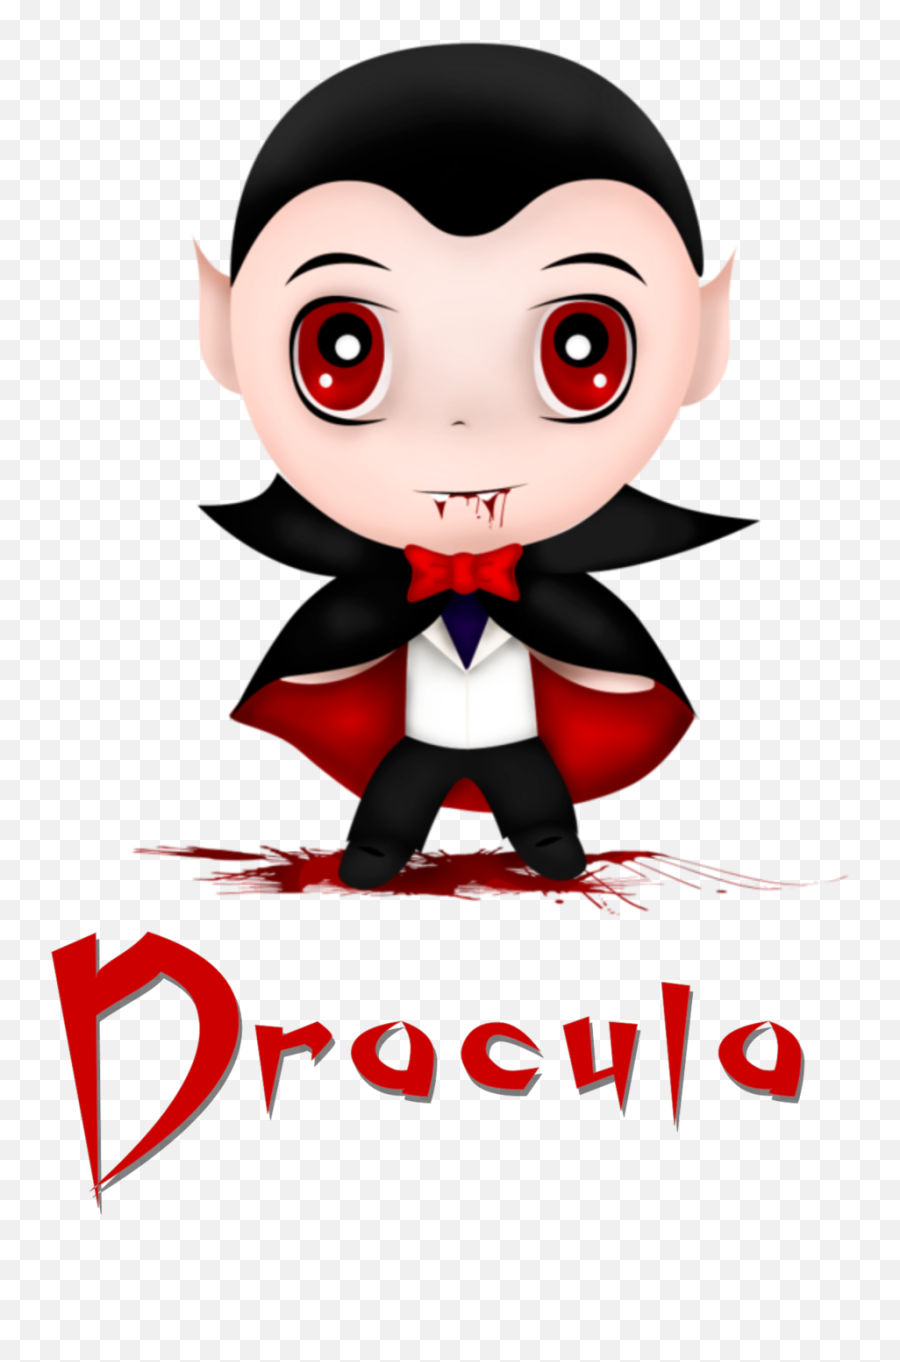 Download Dracula Logo Png Image With No Background - Pngkeycom Portable Network Graphics,Dracula Png